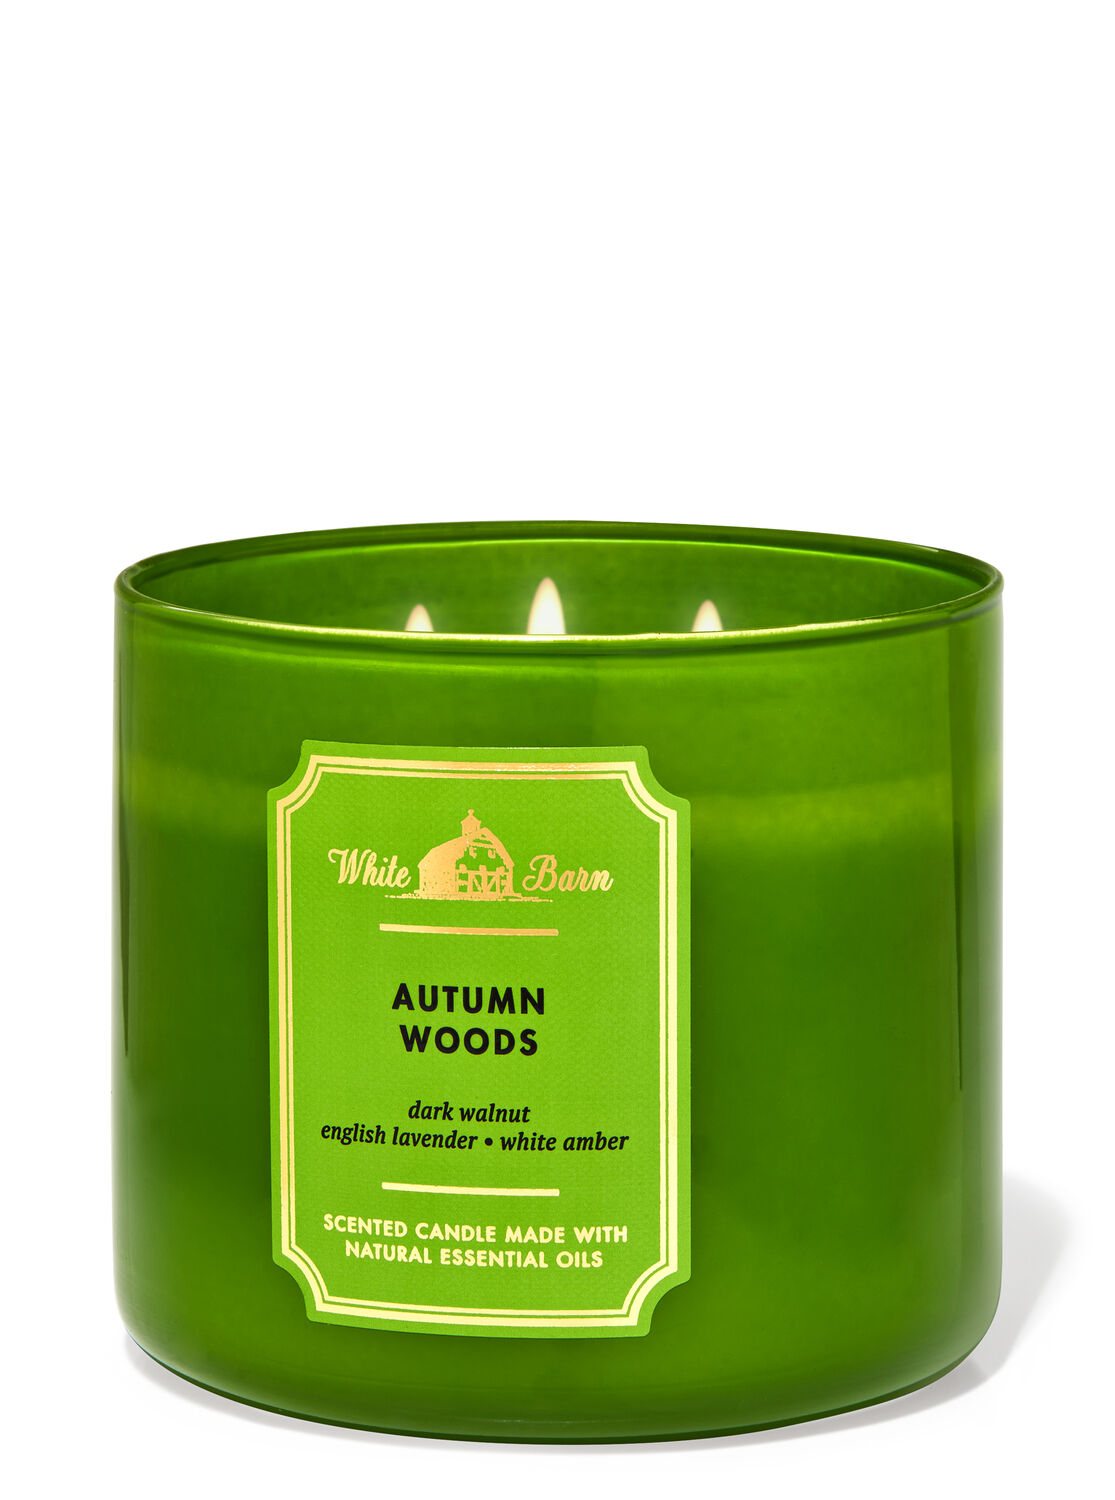 2 Bath & Body Works AUTUMN WOODS 3 Wick Scented Wax Candle 14.5 Large 